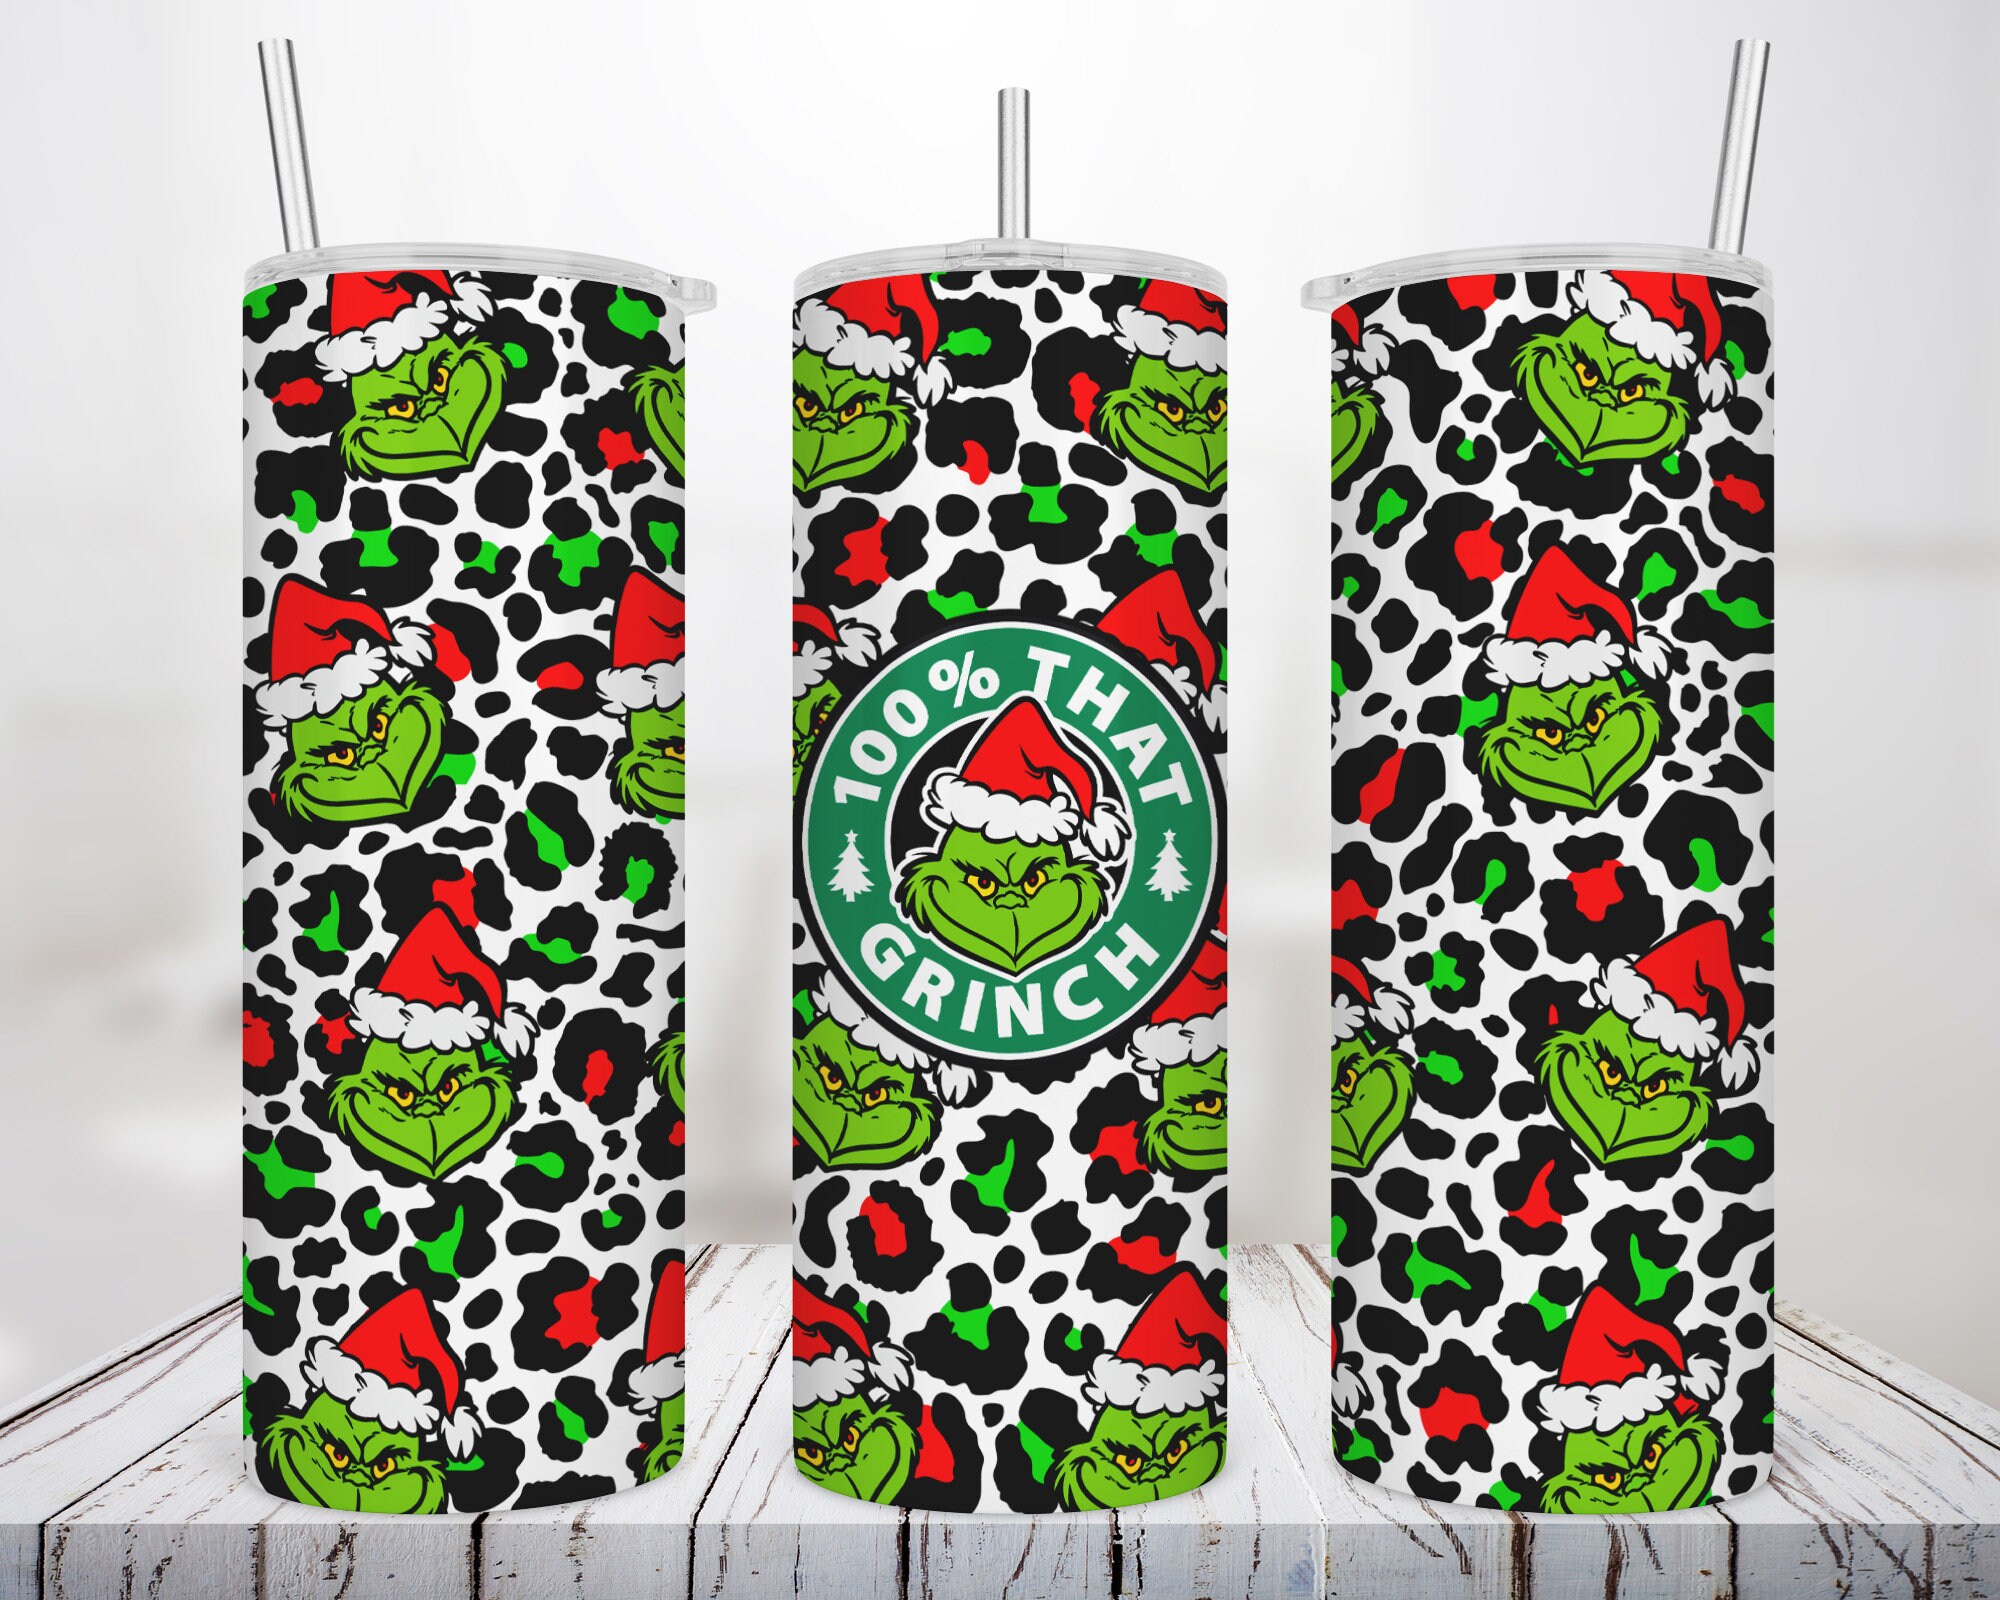 Adult Beverage Inspired Grinch Tumbler – Designs By Andrea Inc.